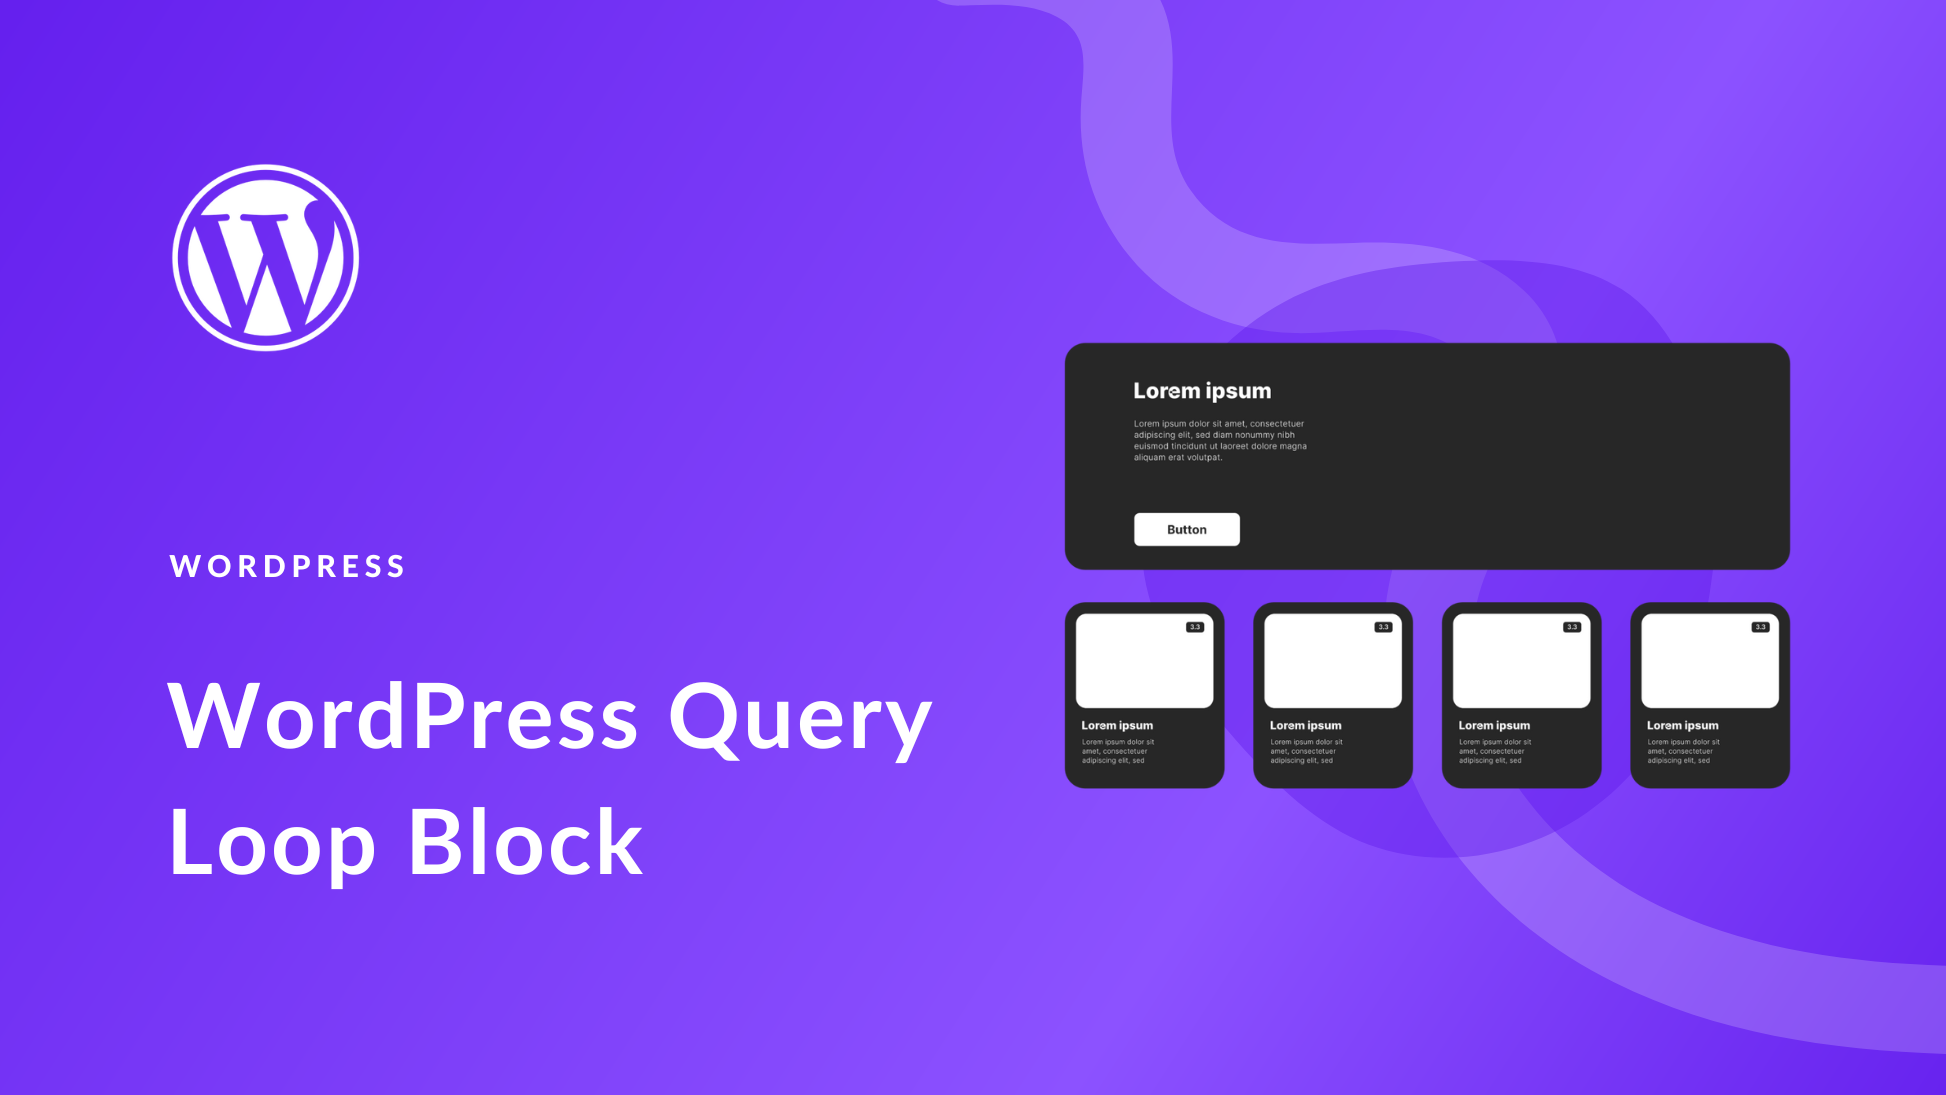 How to Use the WordPress Query Loop Block